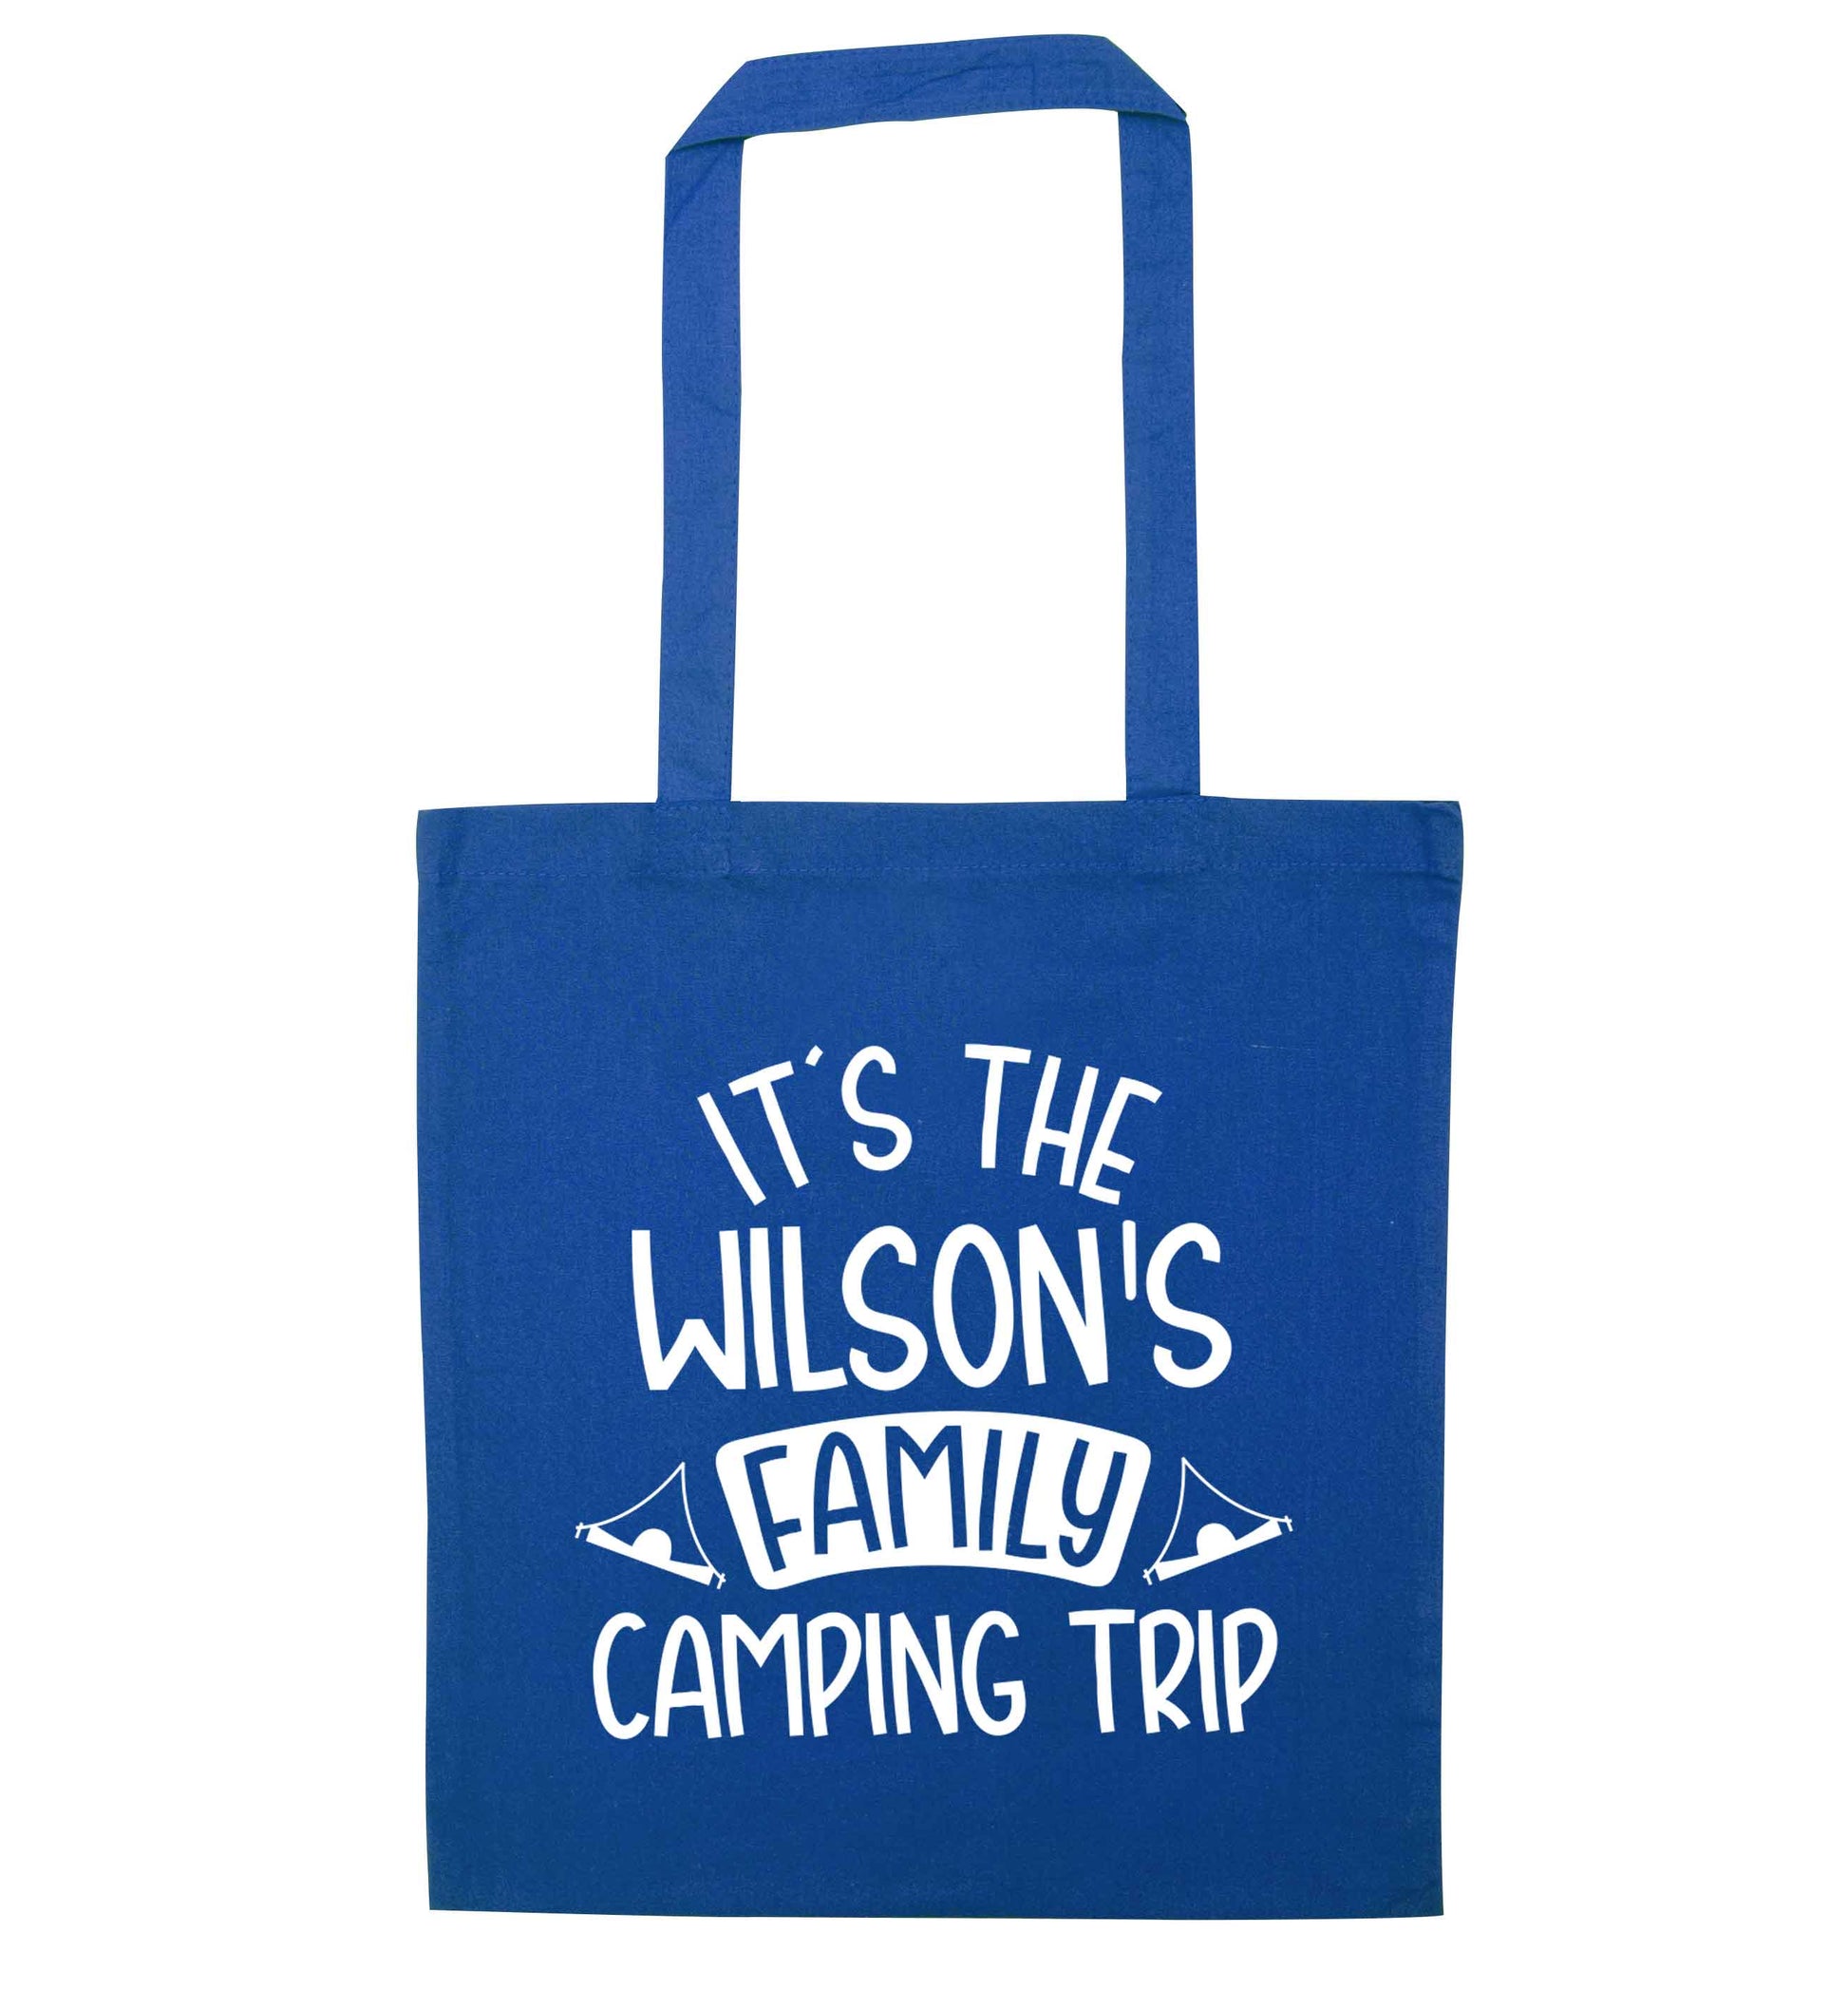 It's the Wilson's family camping trip personalised blue tote bag